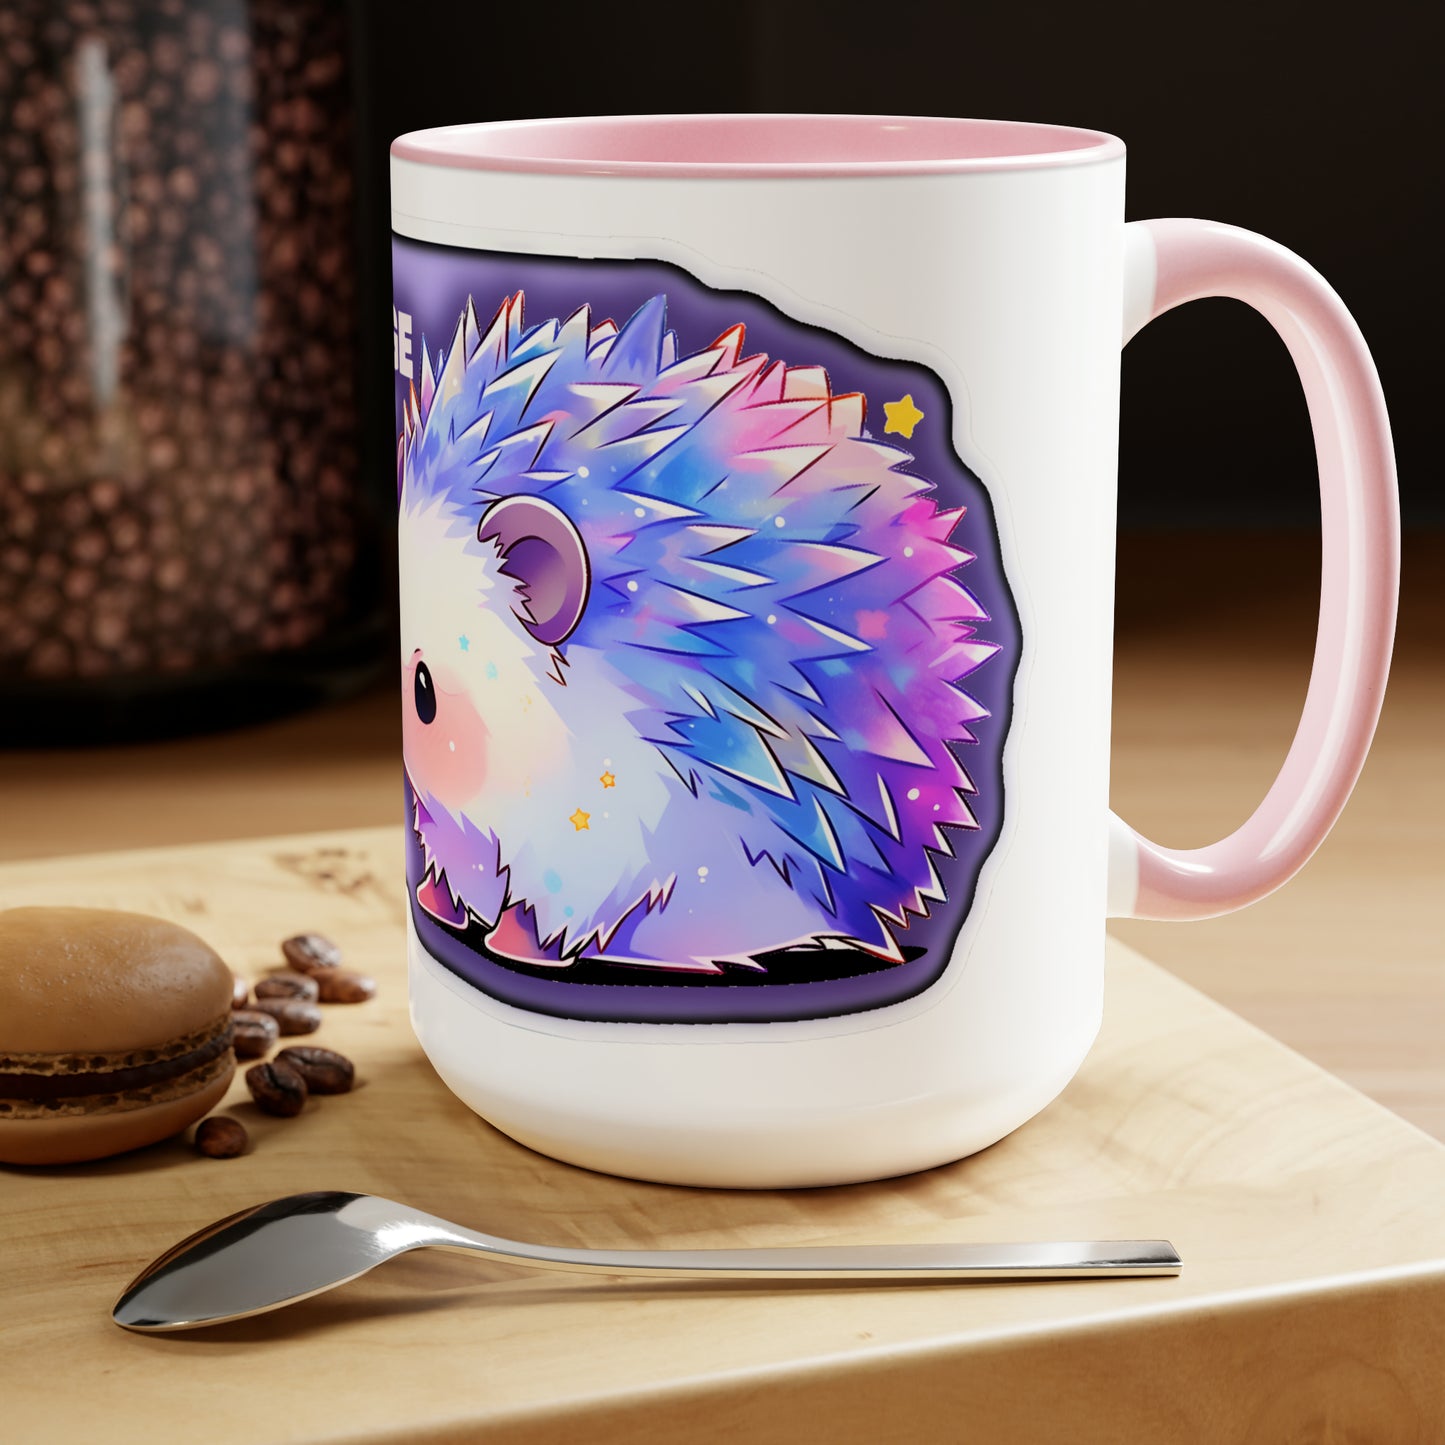 Hedgehog Will Engage in Dialogue for Food Probably Two-Tone 15 oz Mega-Mug